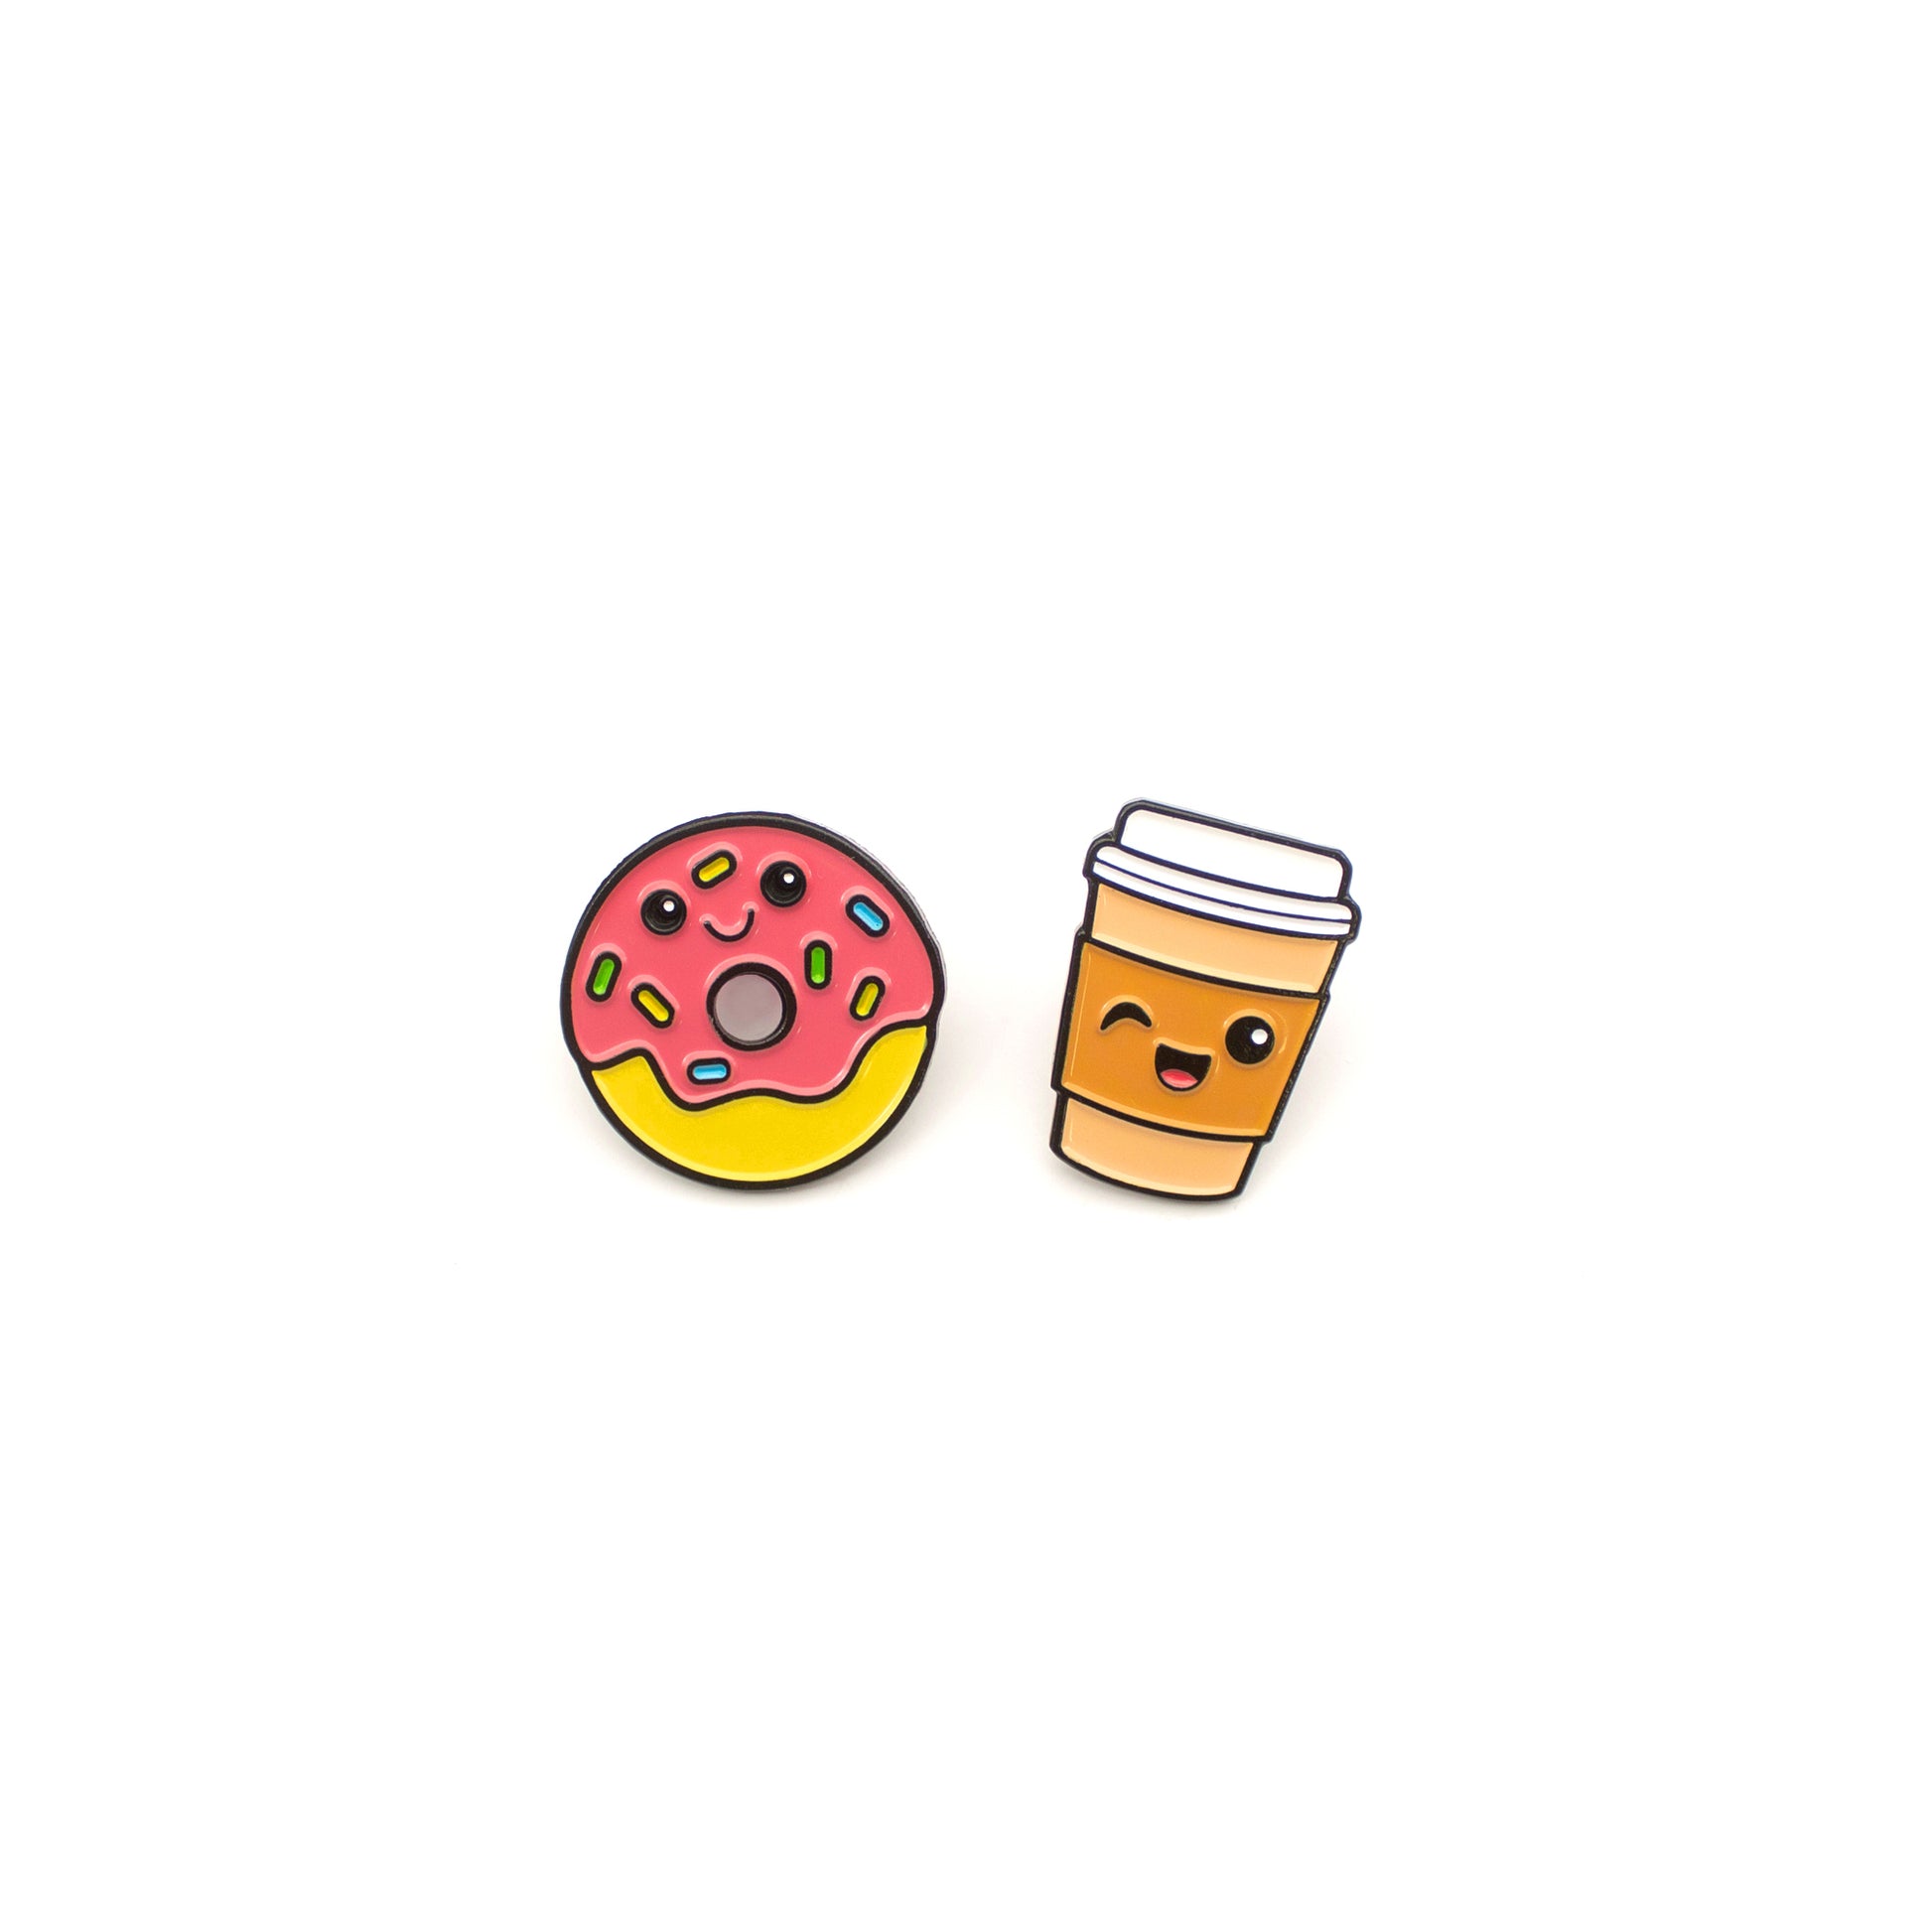 Donut and Coffee enamel pins on white background